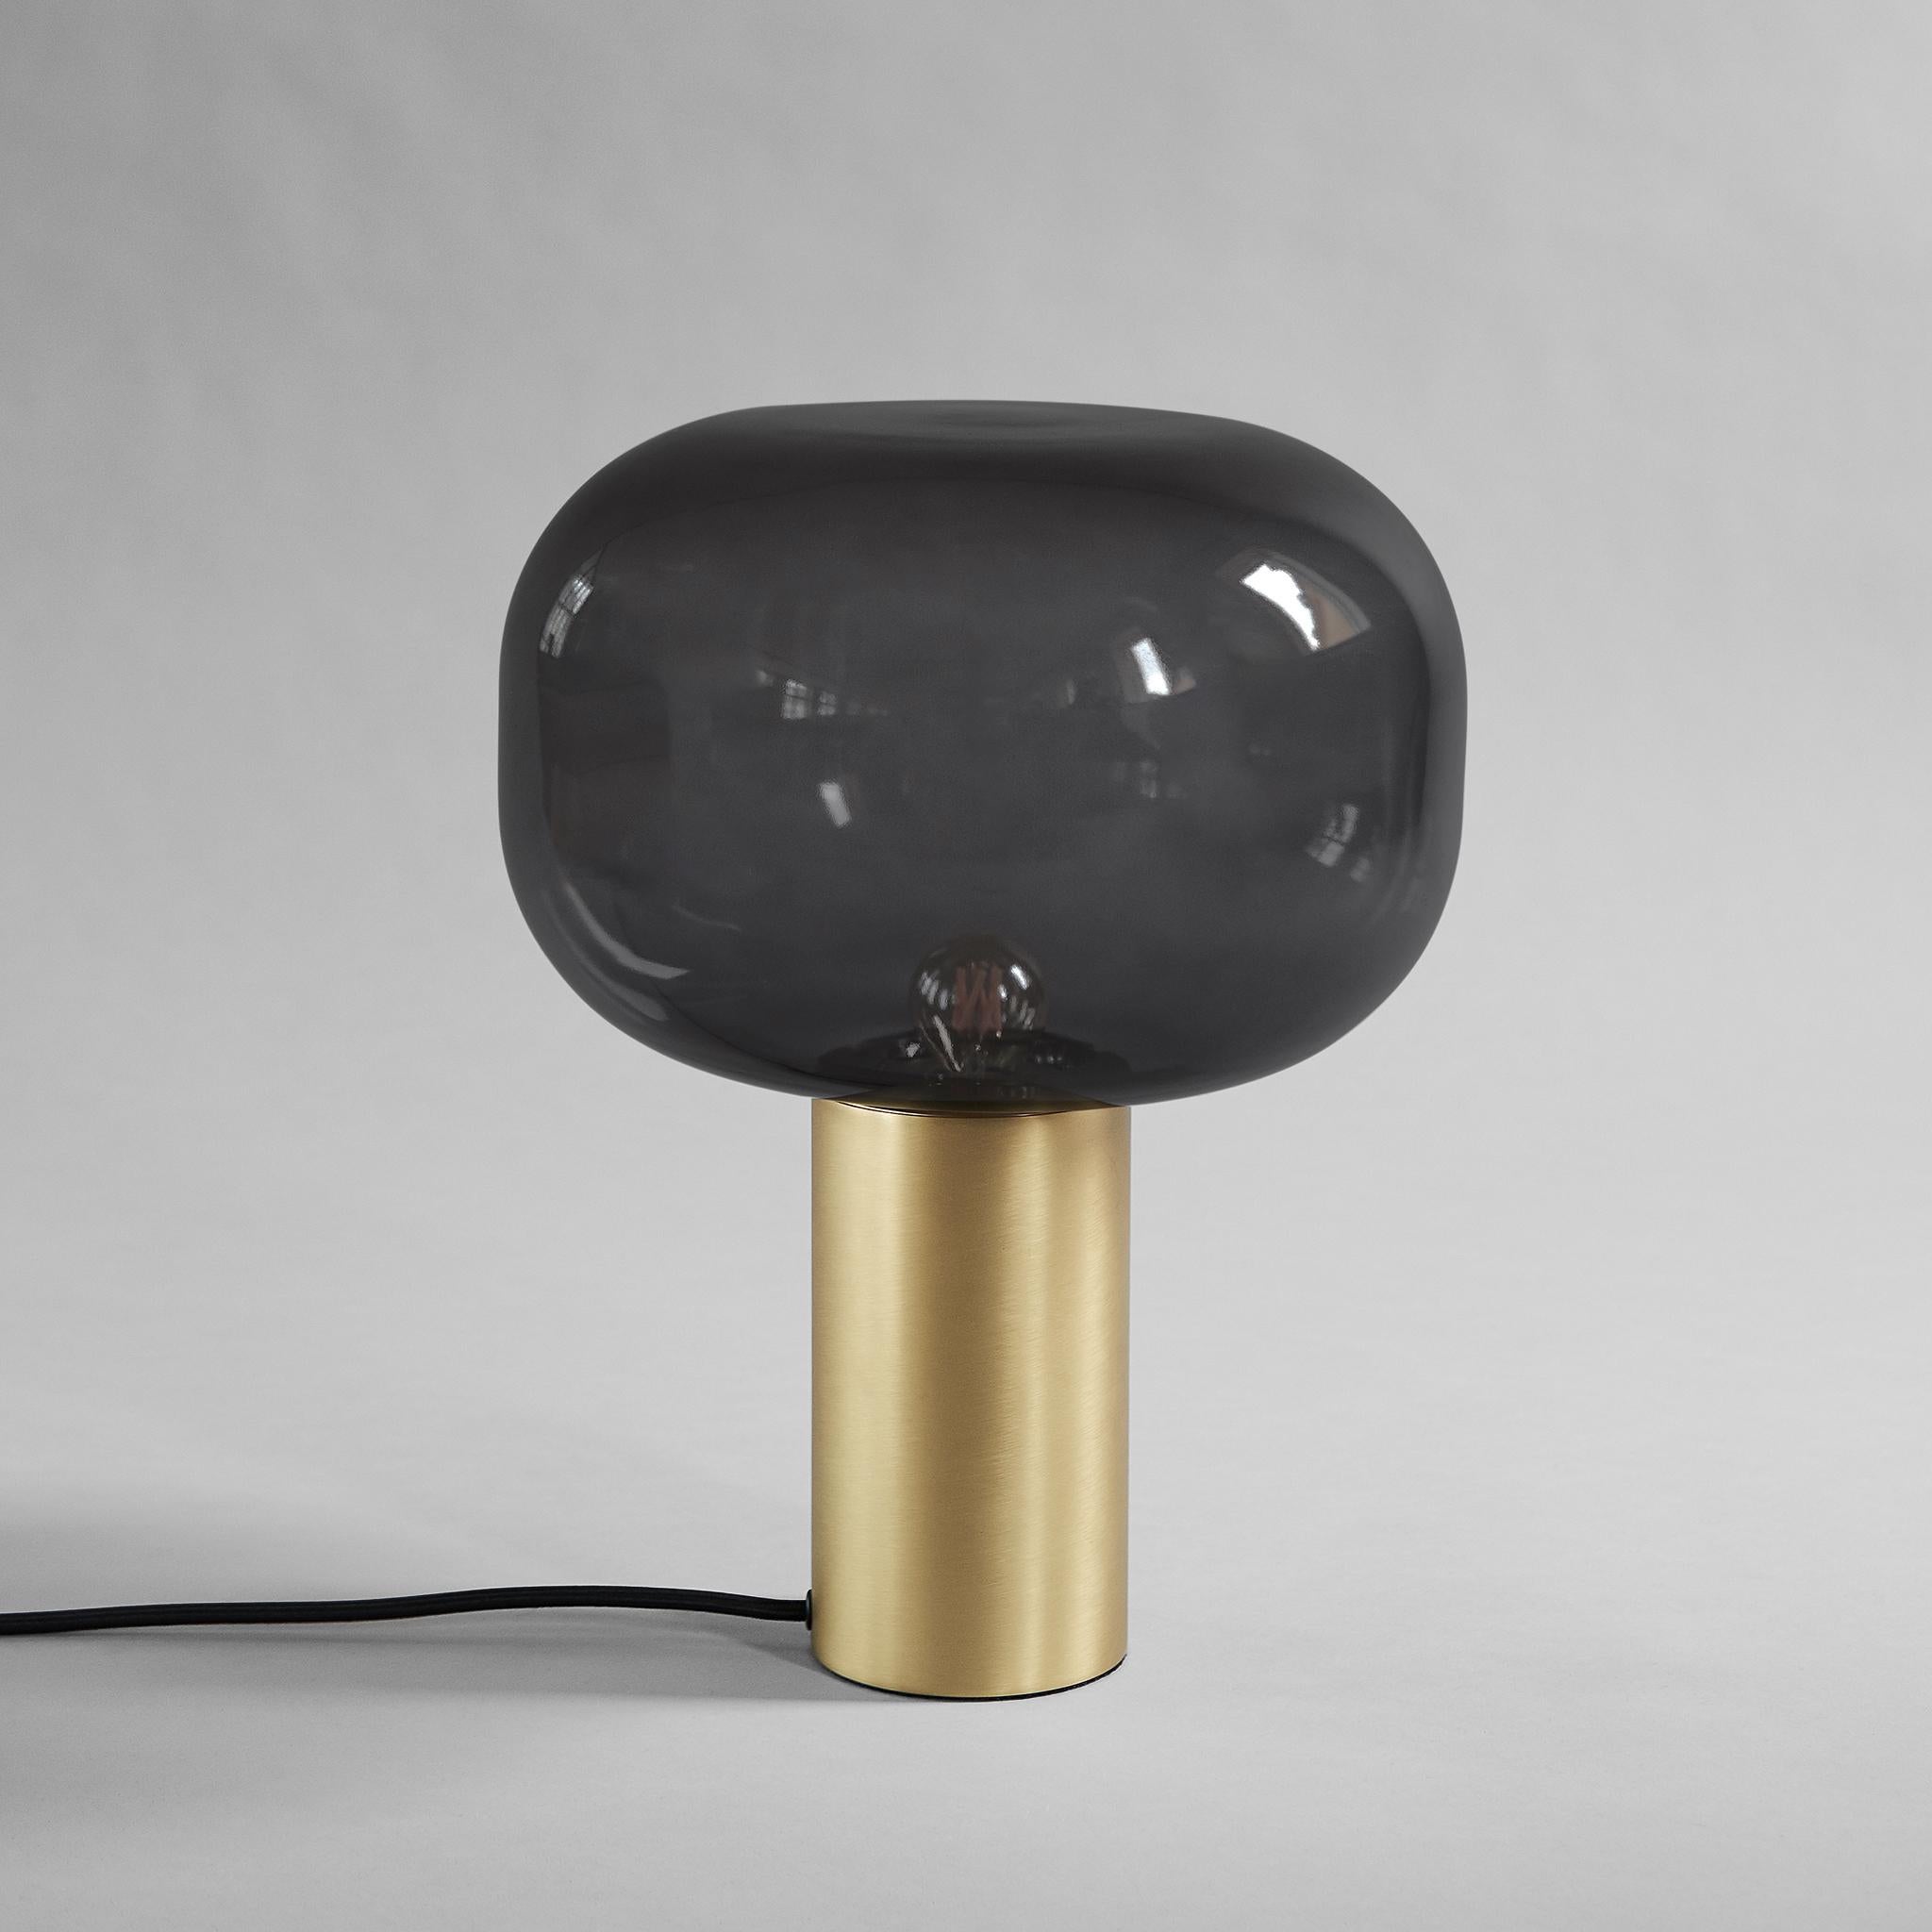 Mushroom floor lamp by 101 Copenhagen
Designed by Kristian Sofus Hansen & Tommy Hyldahl.
Dimensions: L 30 x W 30 x H 35 cm
Cable length: 200 CM
This product is not wired for USA
Materials: Brass; Lampbase: 100% Aluminium, with plated brass